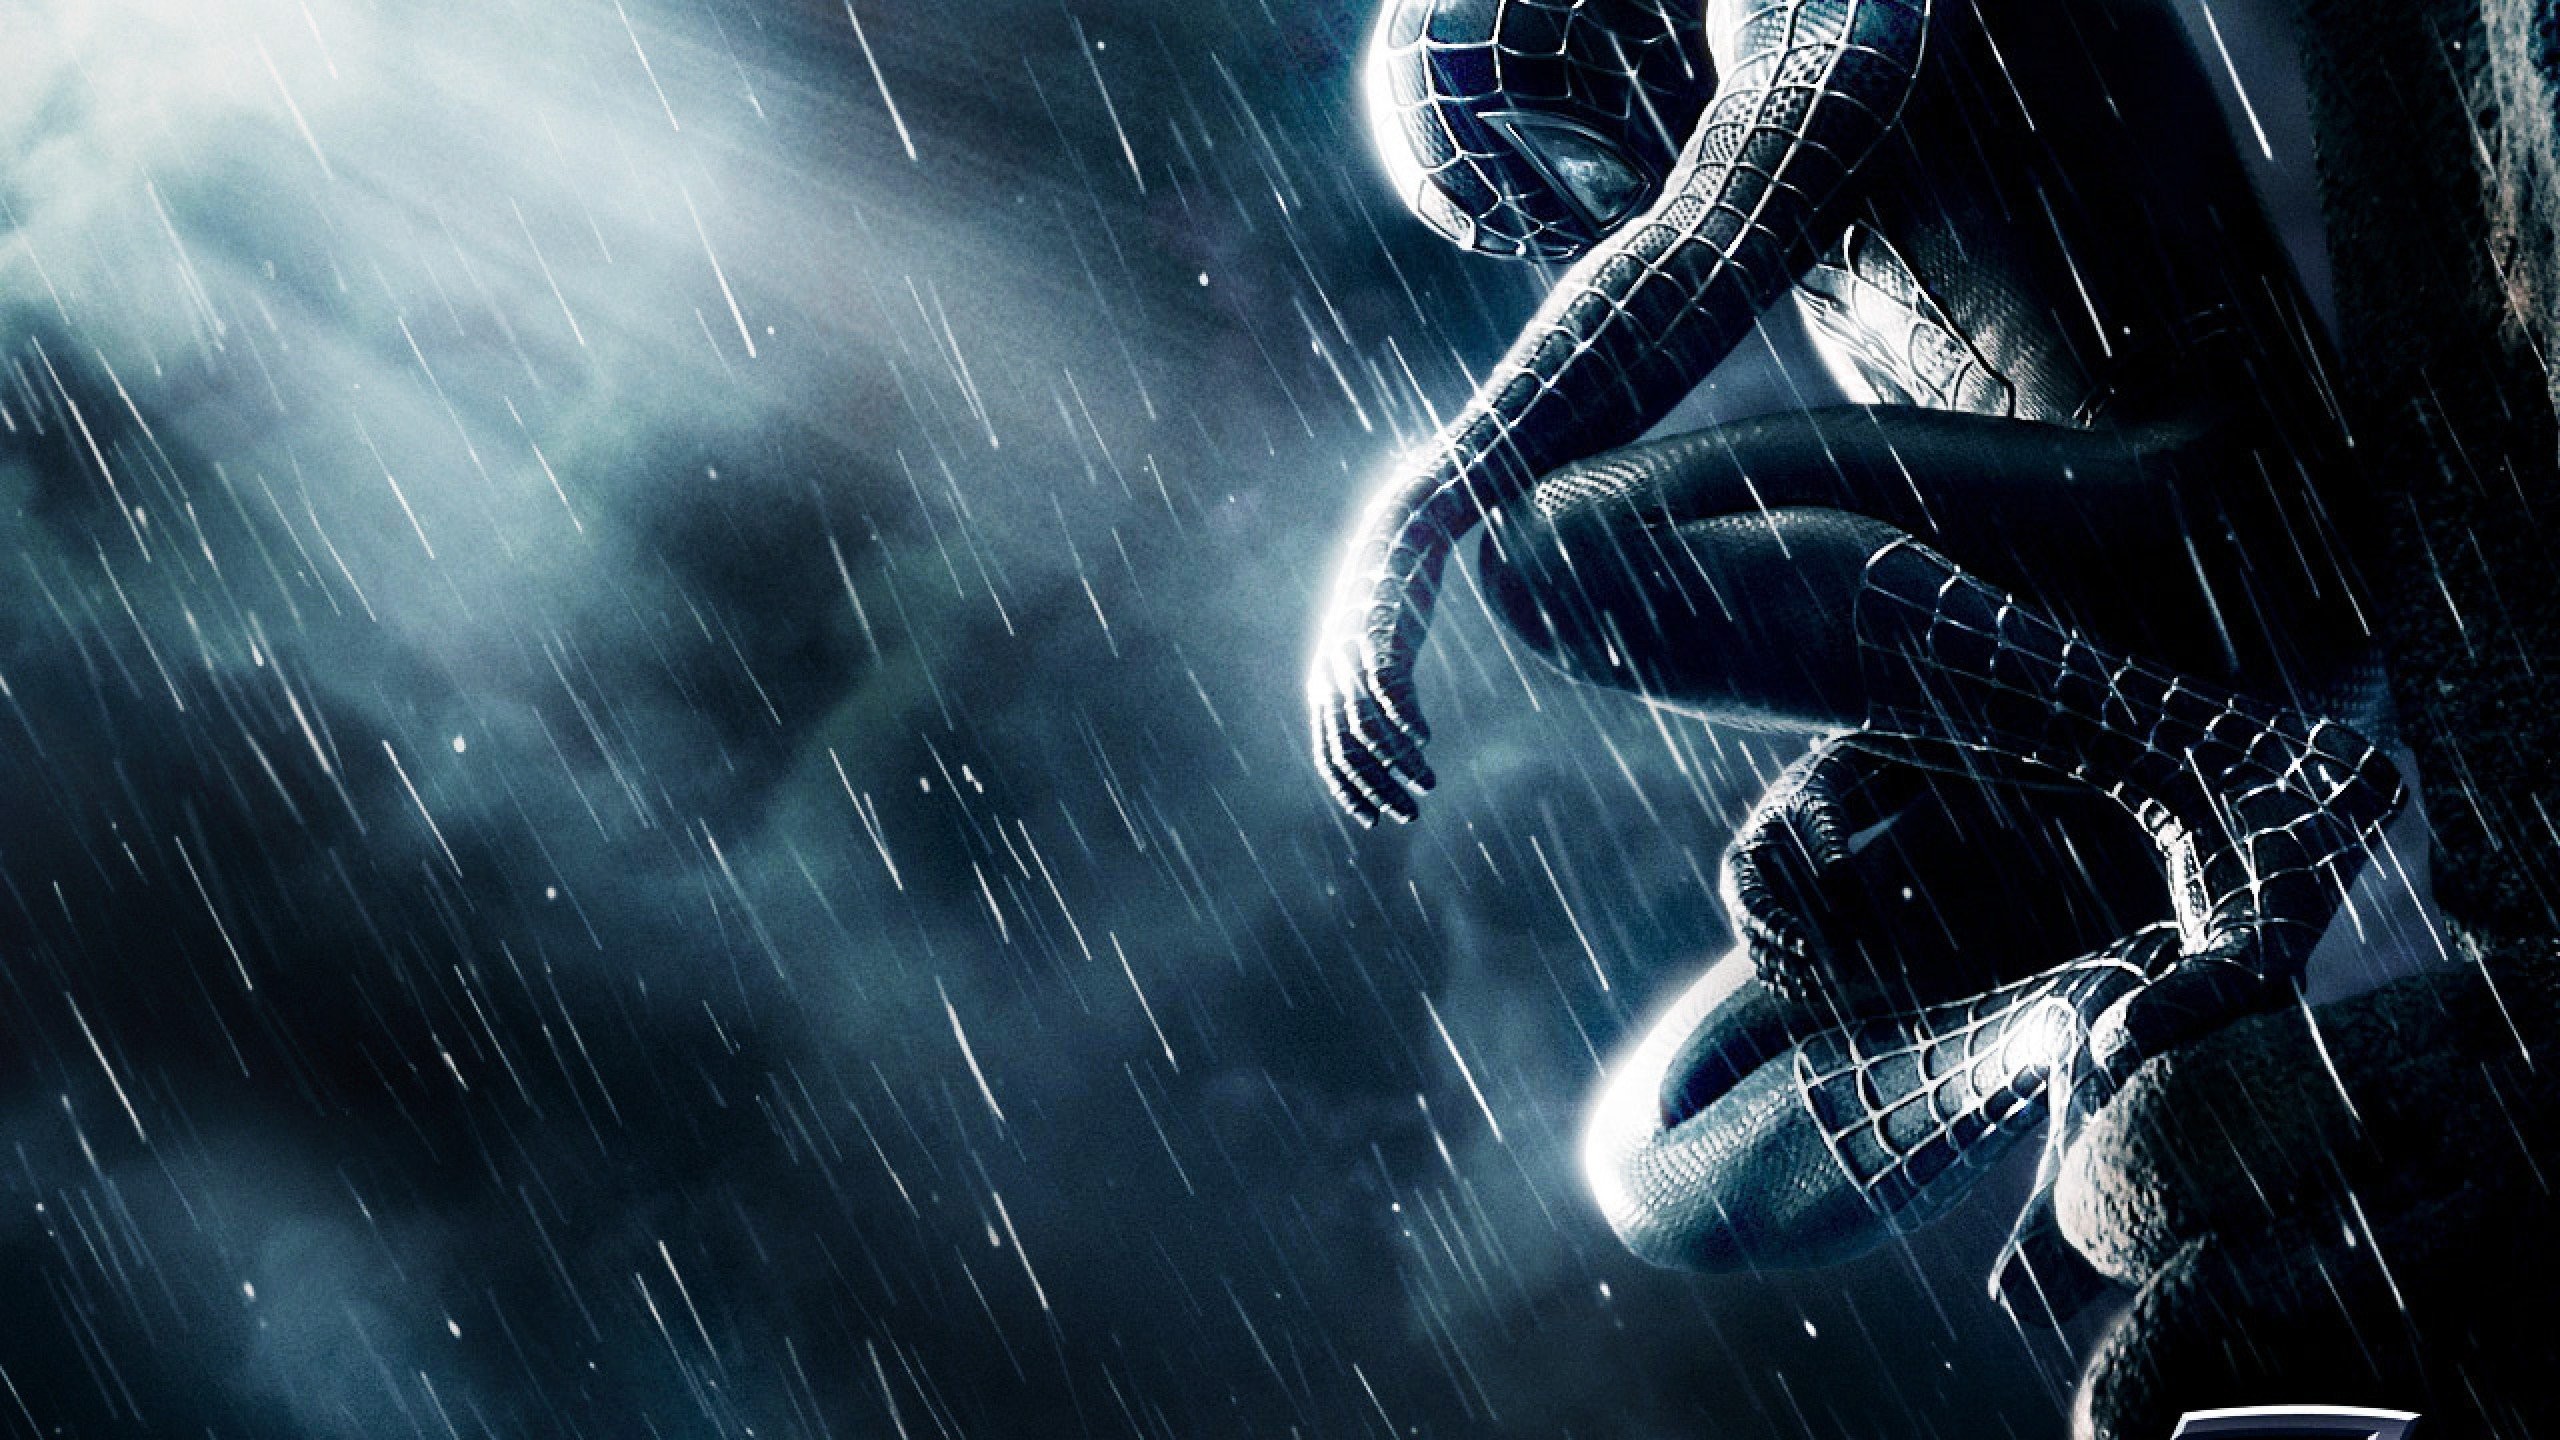 SpiderMan Cool Wallpapers  Wallpaper Cave